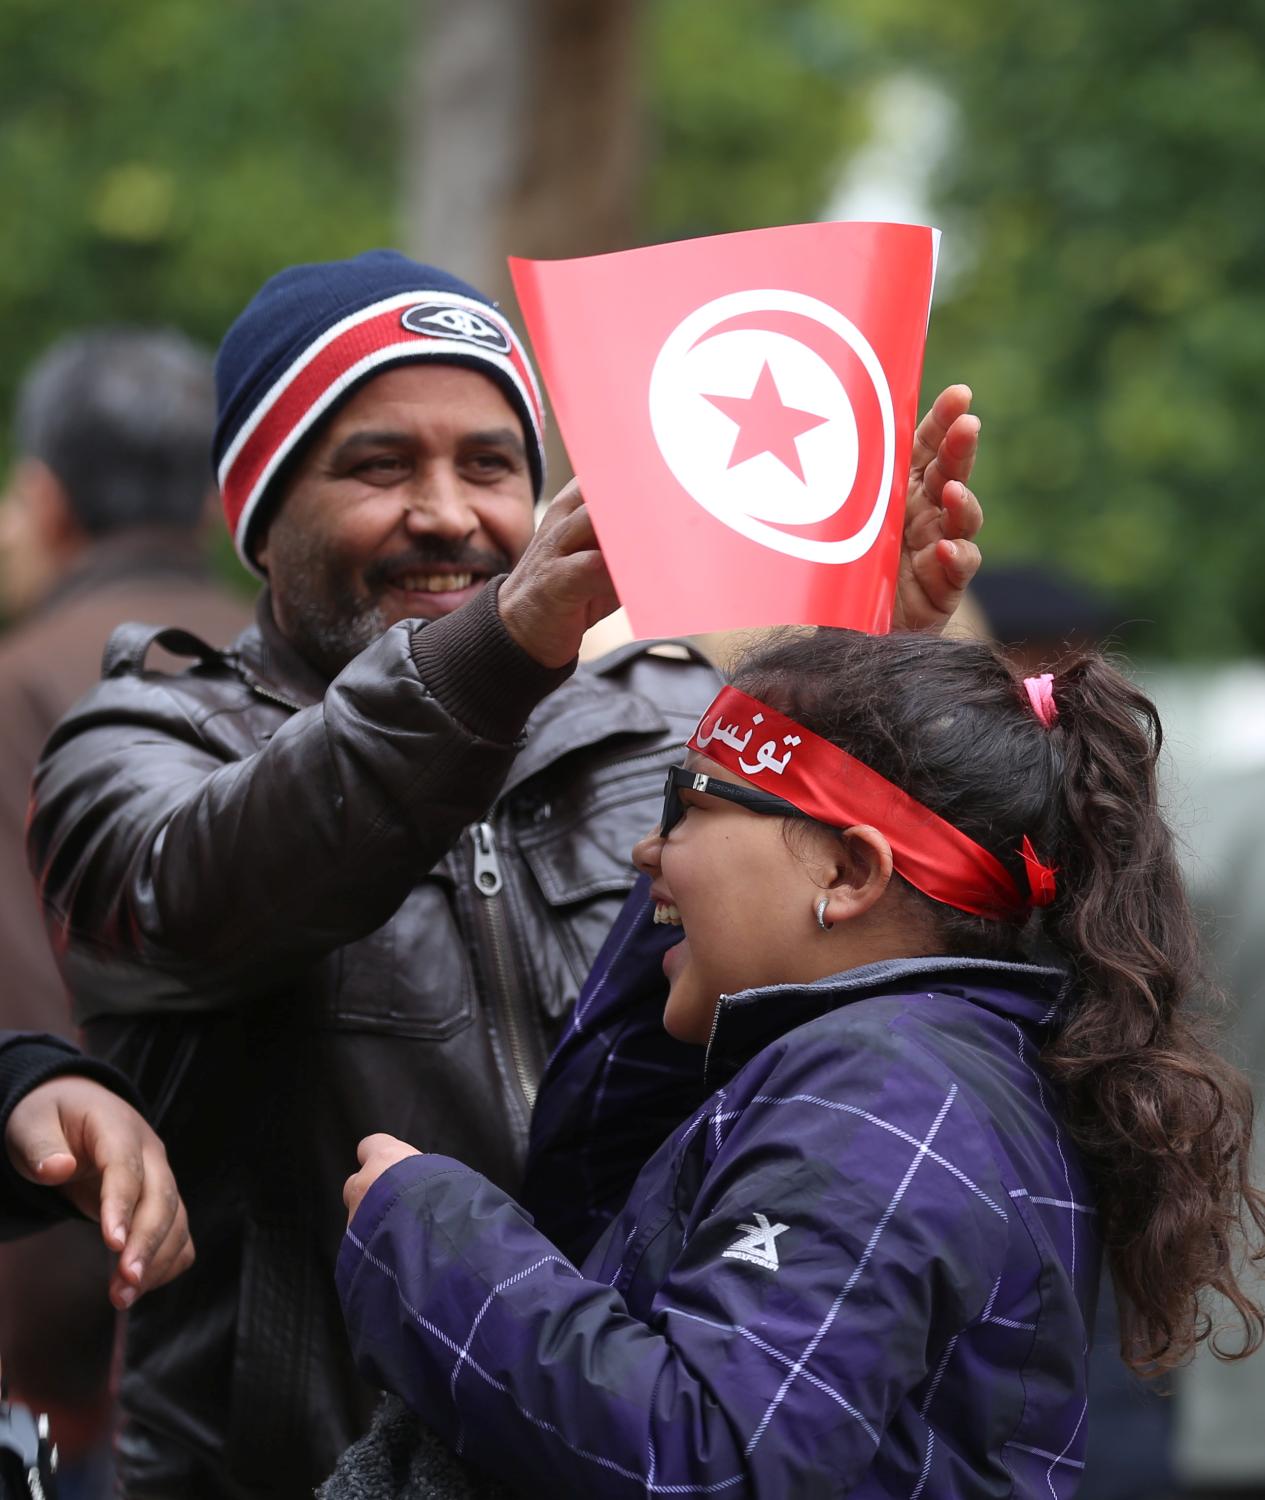 A man adjusts a flag for his daughter during celebrations marking the sixth anniversary of Tunisia's 2011 revolution in Habib Bourguiba Avenue in Tunis, Tunisia January 14, 2017. REUTERS/Zoubeir Souissi - RC192ECA71B0